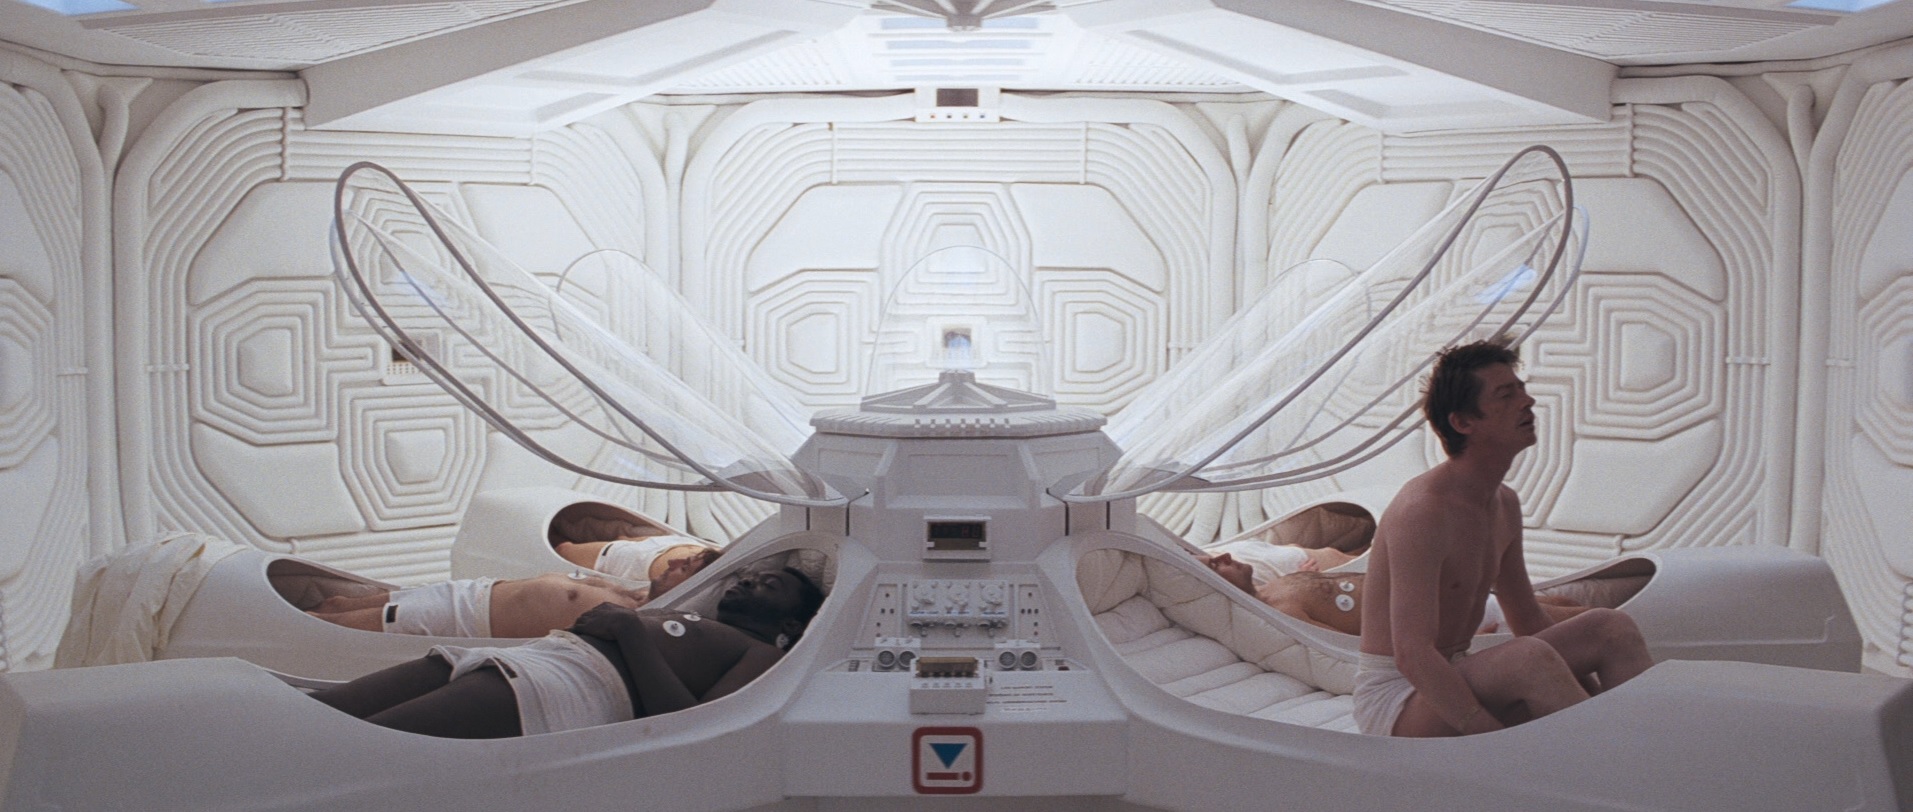 The crew of the Nostromo wakes up from their pods in a white room in Alien.